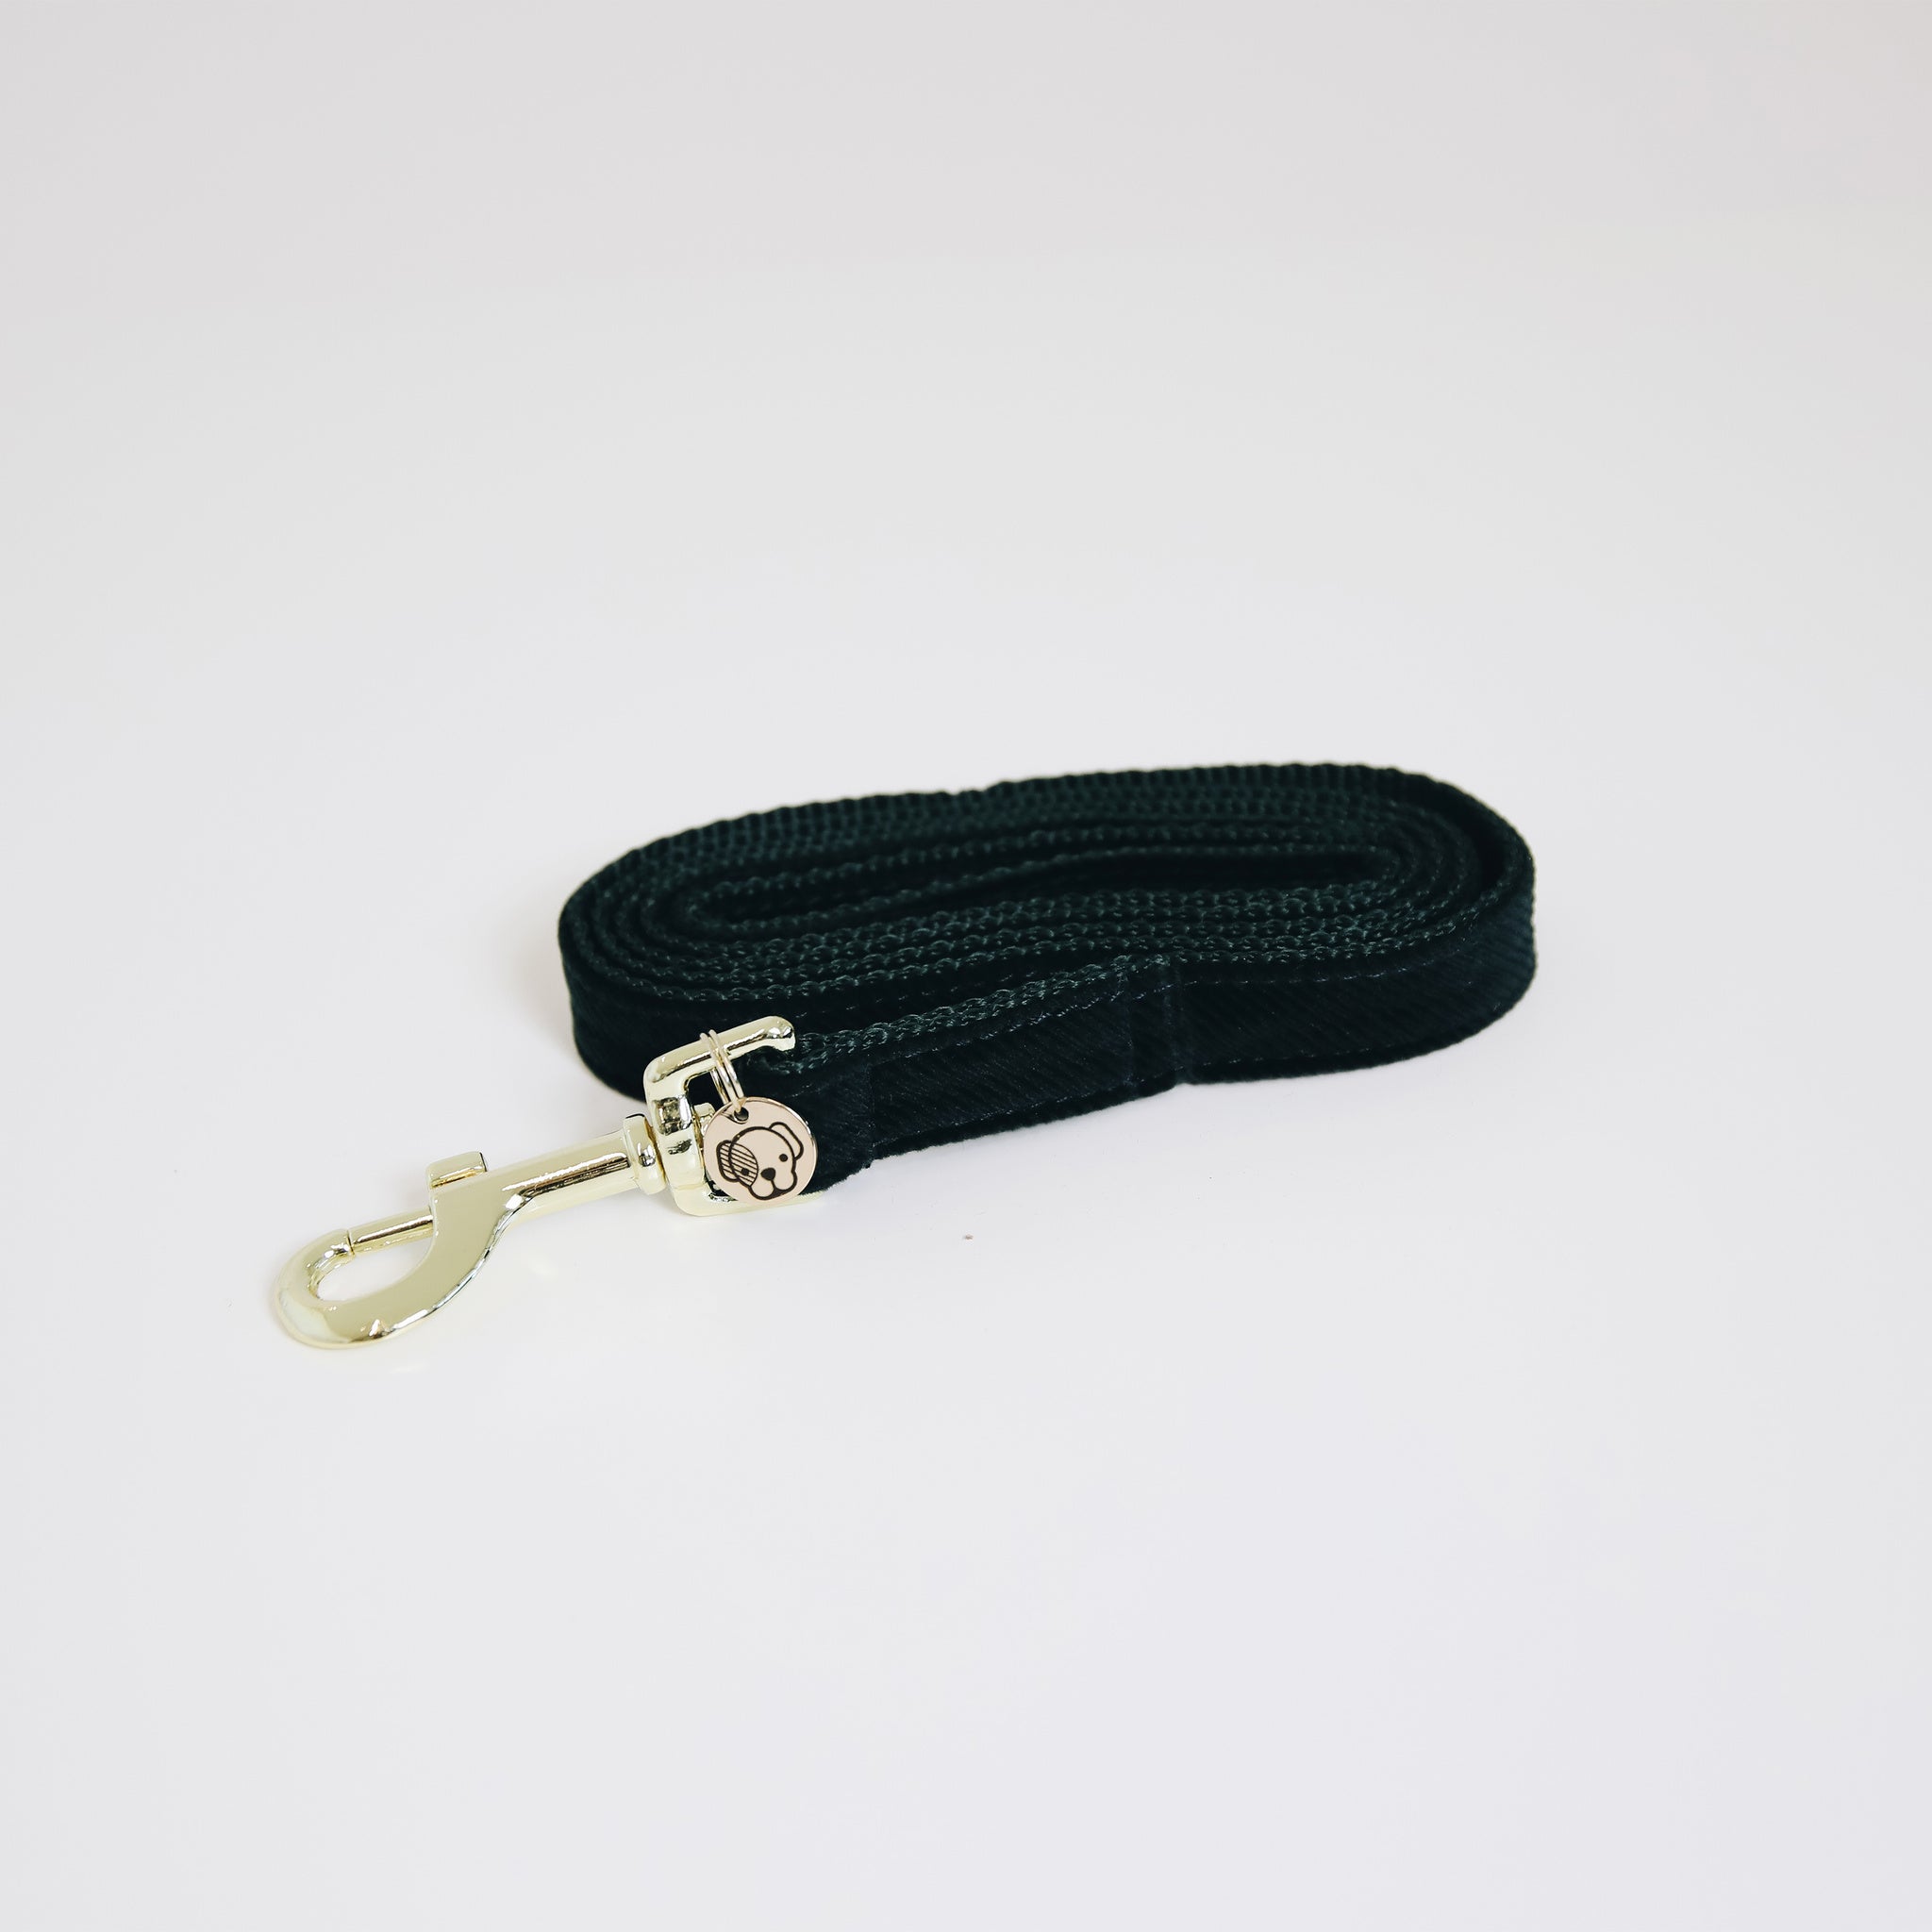 The Kentucky Corduroy lead. Give your dog the luxury it deserves. The lead is made from a super soft baby cord  and lined with nylon for extra strength and durability.  The lead features the gold Kentucky logo clasp and gold dog tag to engrave your details. 